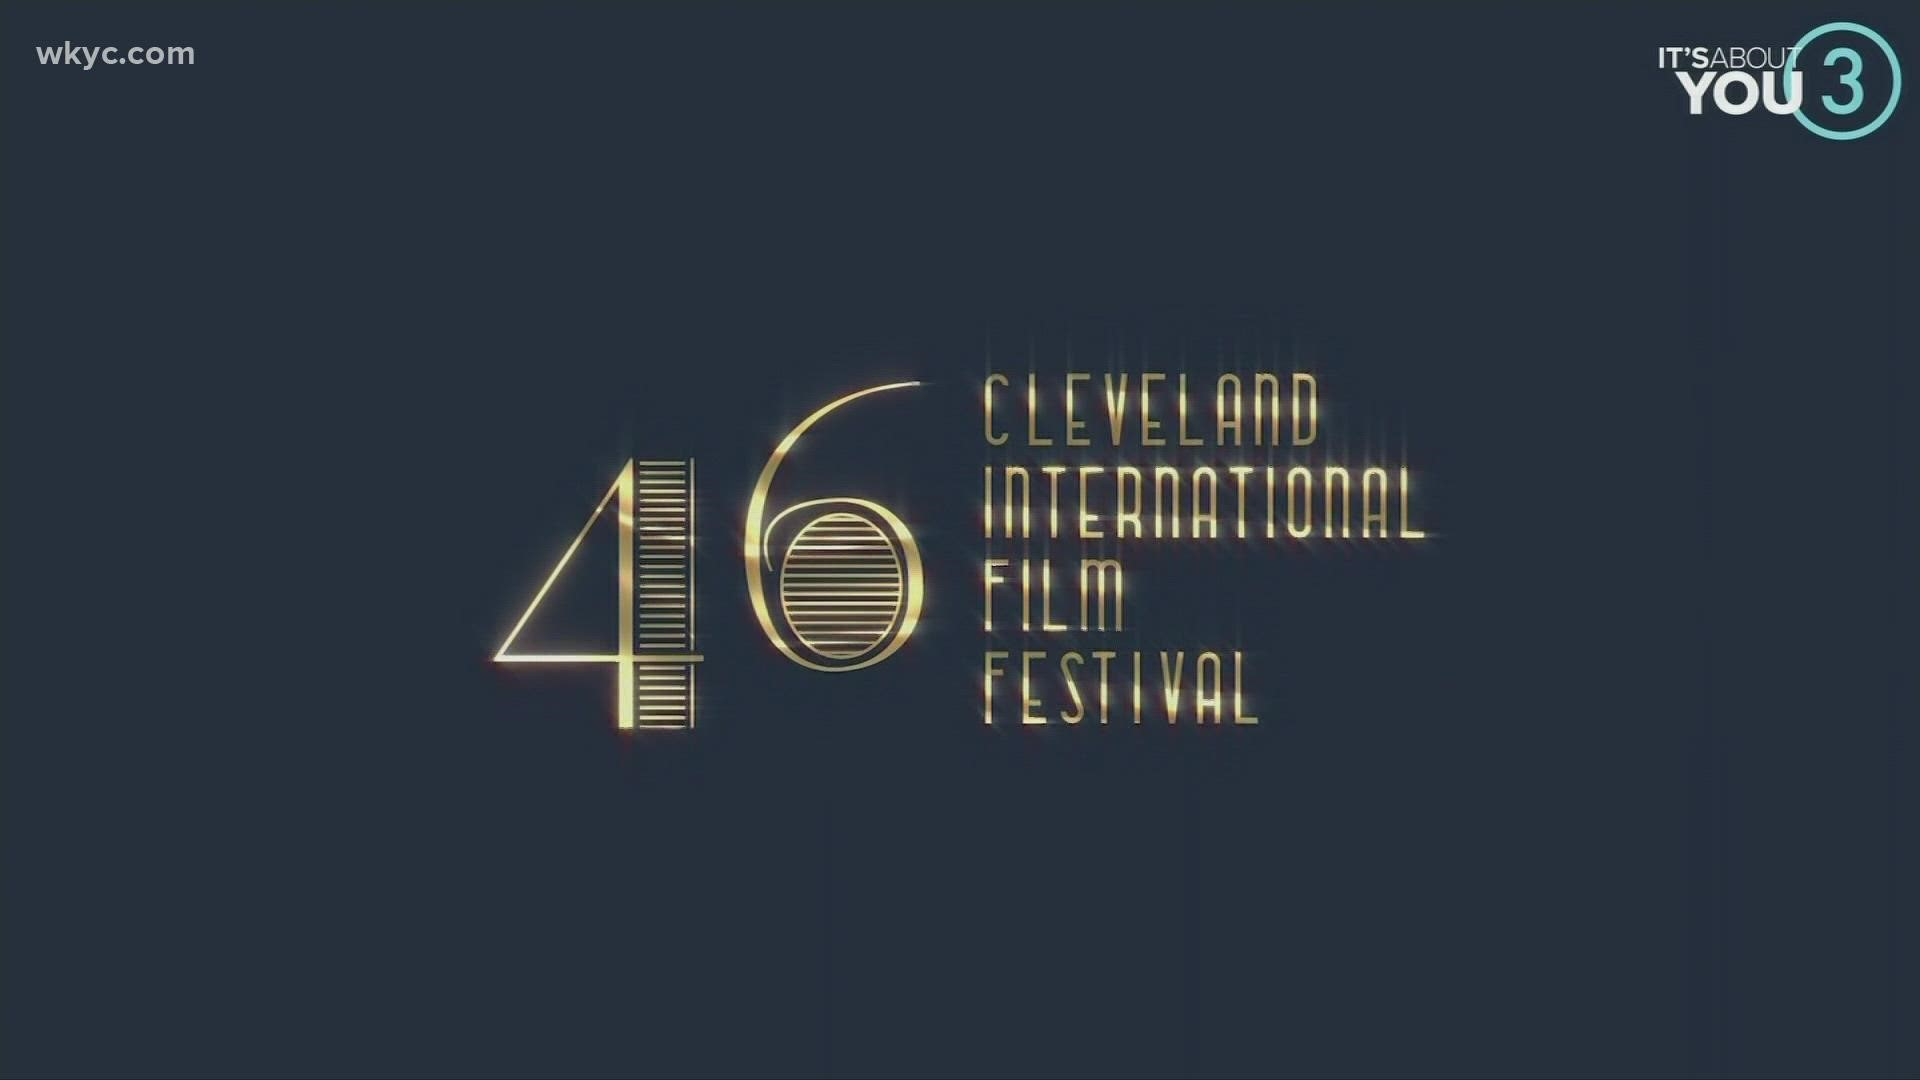 Joe speaks with Mallory Martin about all the details for this year's Cleveland International Film Festival!